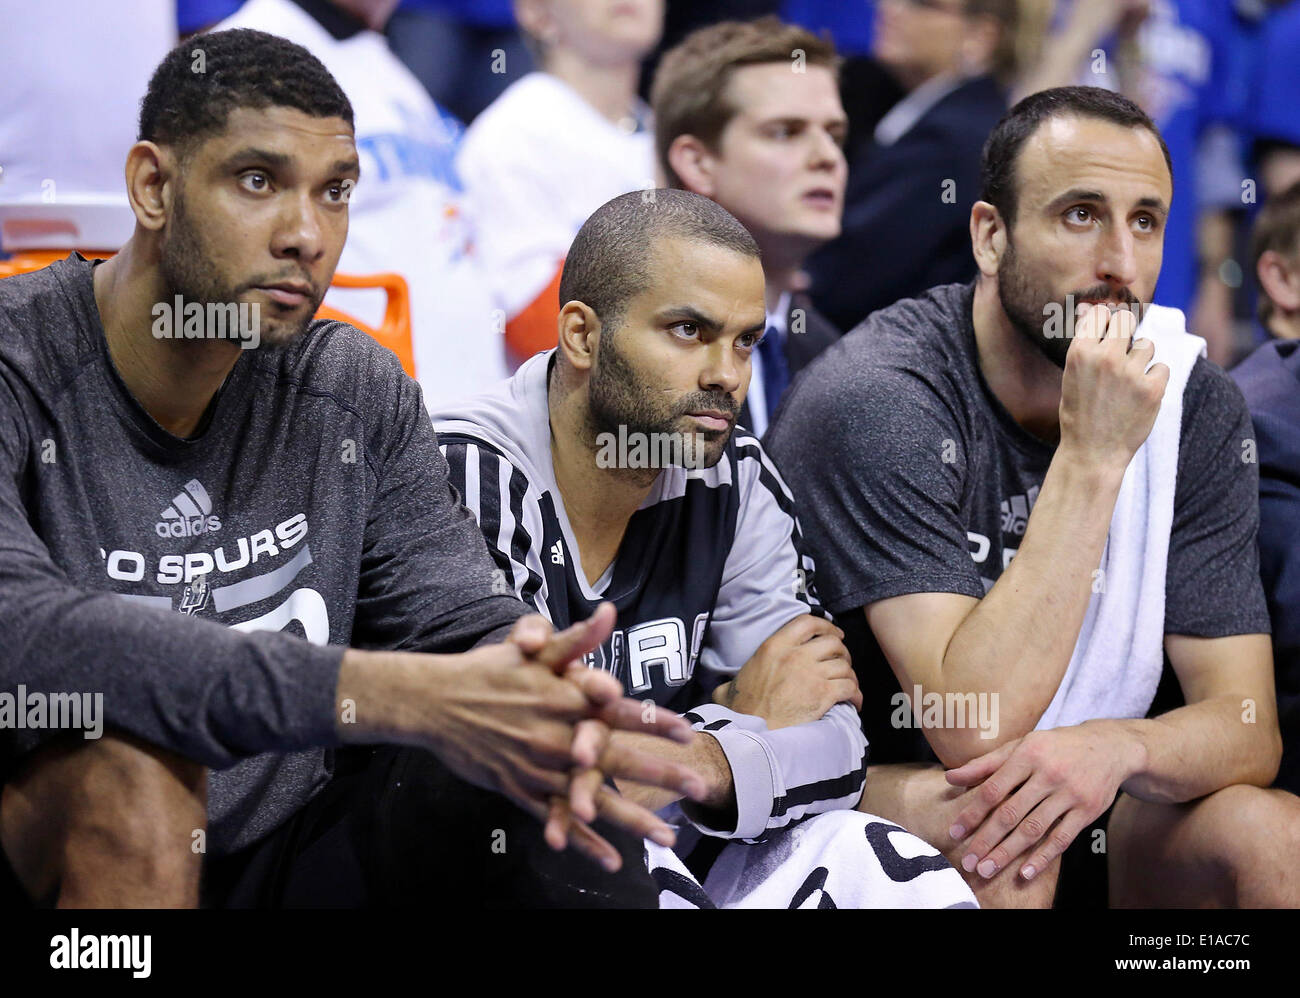 May 27, 2014 - Oklahoma City, OKLAHOMA, USA - San Antonio Spurs' Tim Duncan (from left), Tony Parker, and Manu Ginobili watch second half action in Game 4 of the Western Conference Finals against the Oklahoma City Thunder Tuesday May 27, 2014 at Chesapeake Energy Arena in Oklahoma City, OK. The Thunder won 105-92. (Credit Image: © San Antonio Express-News/ZUMAPRESS.com) Stock Photo